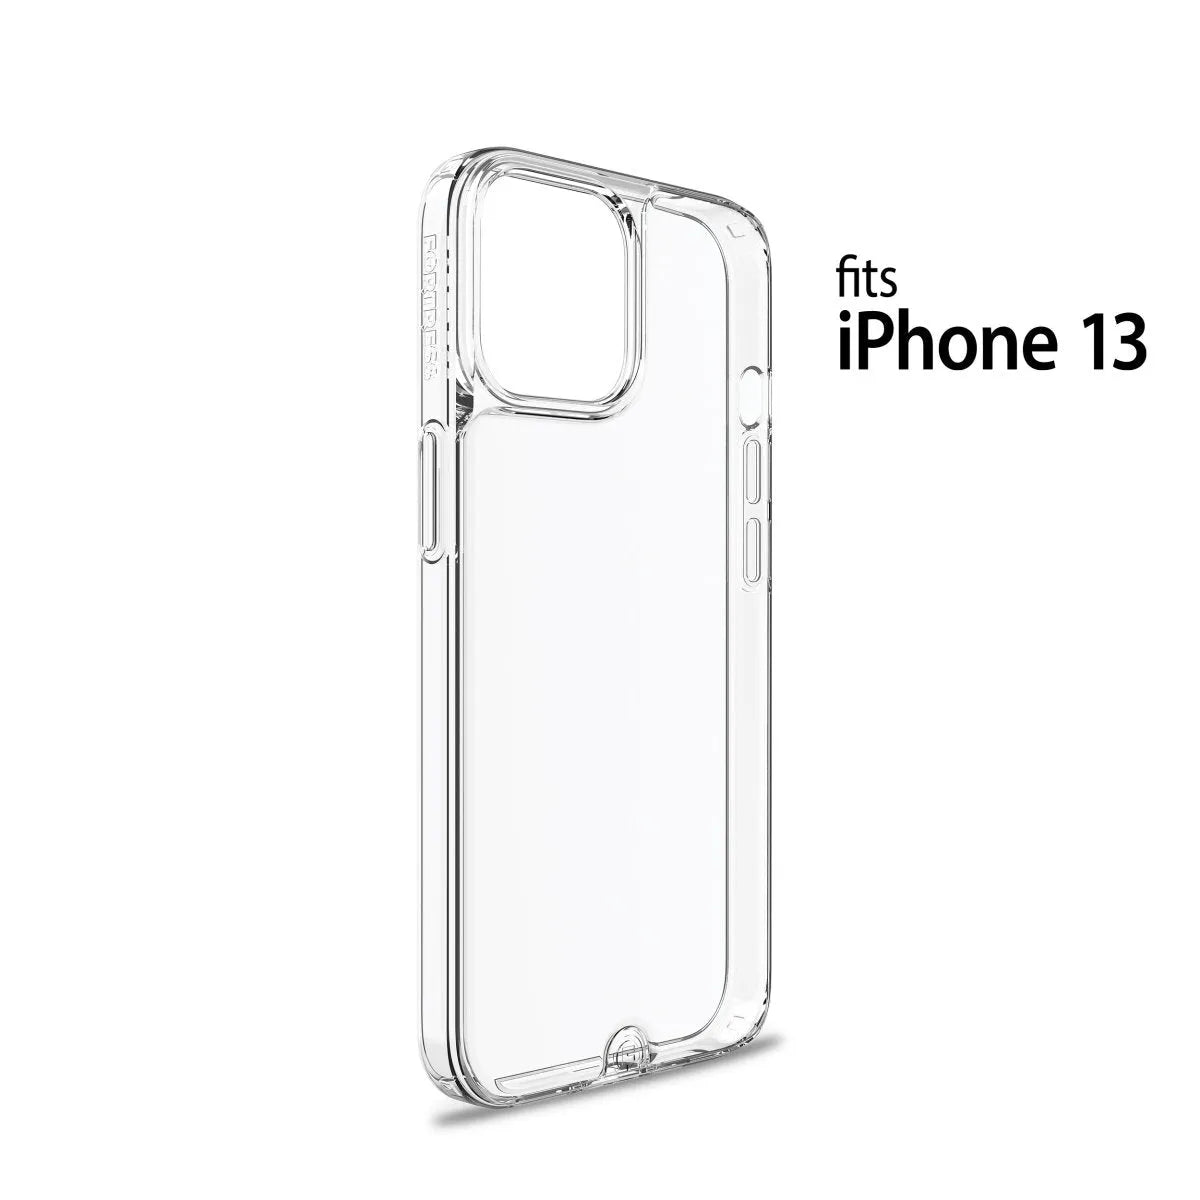 Fortress Fortress Fortress Infinite Glass Case for iPhone 13  Infinite Glass 